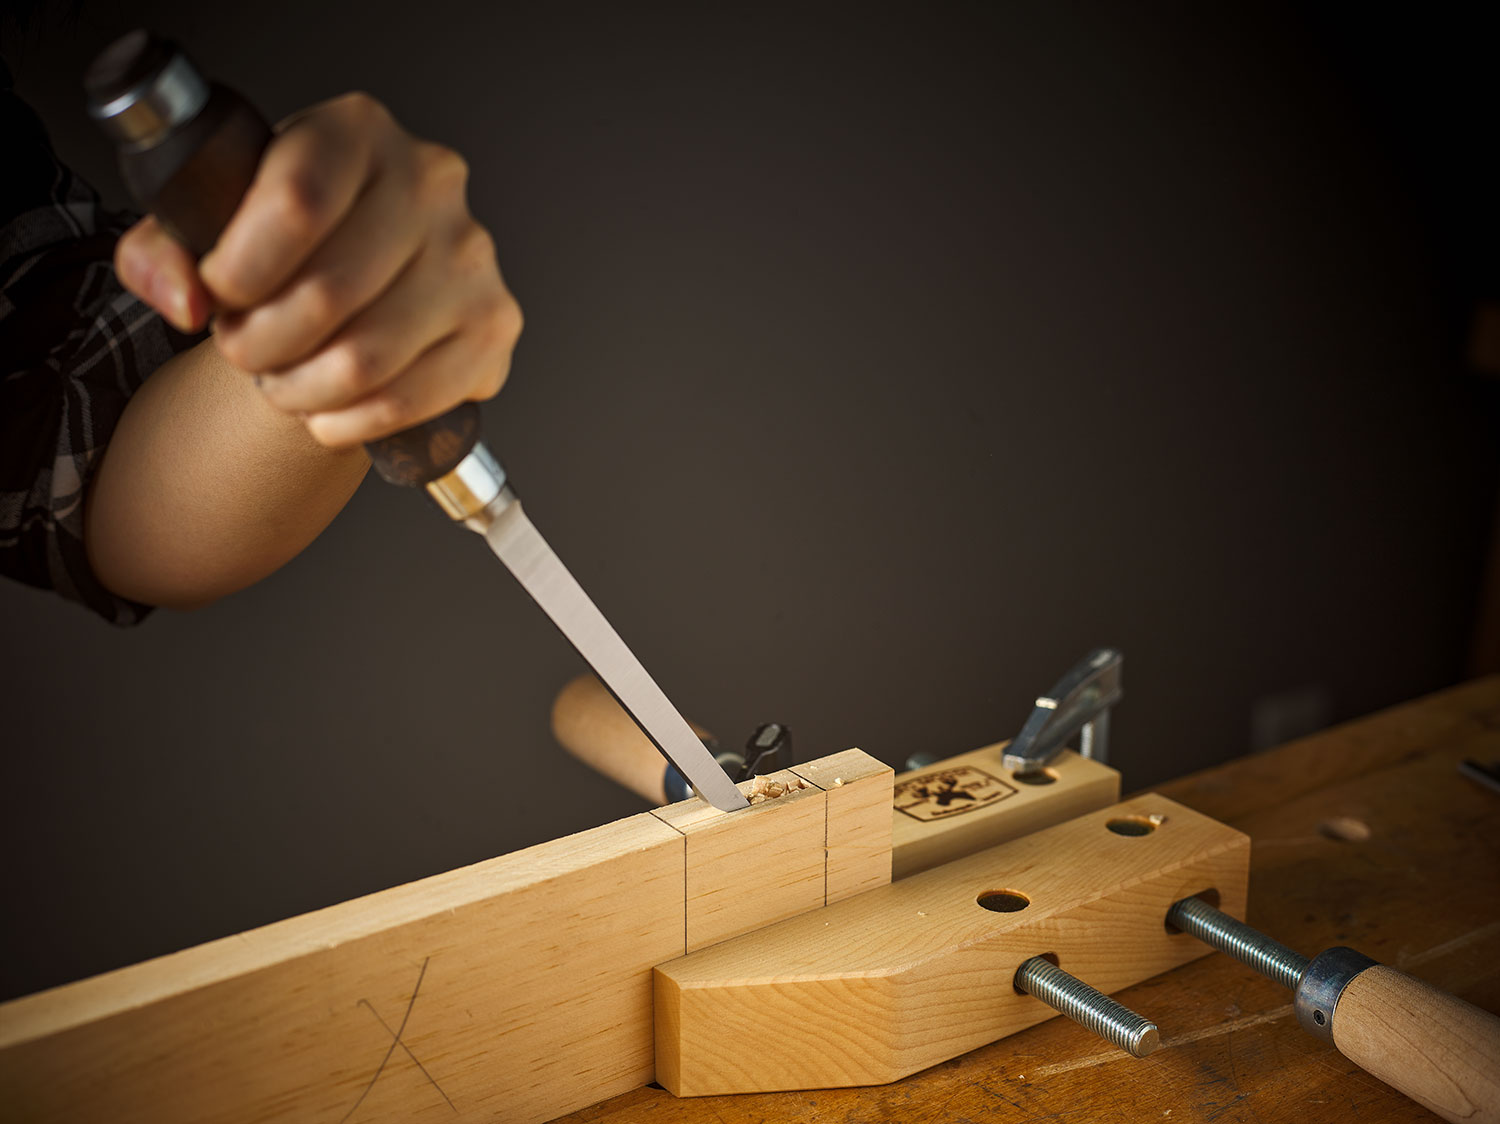 A mortise being cut into a board using a Narex chisel.